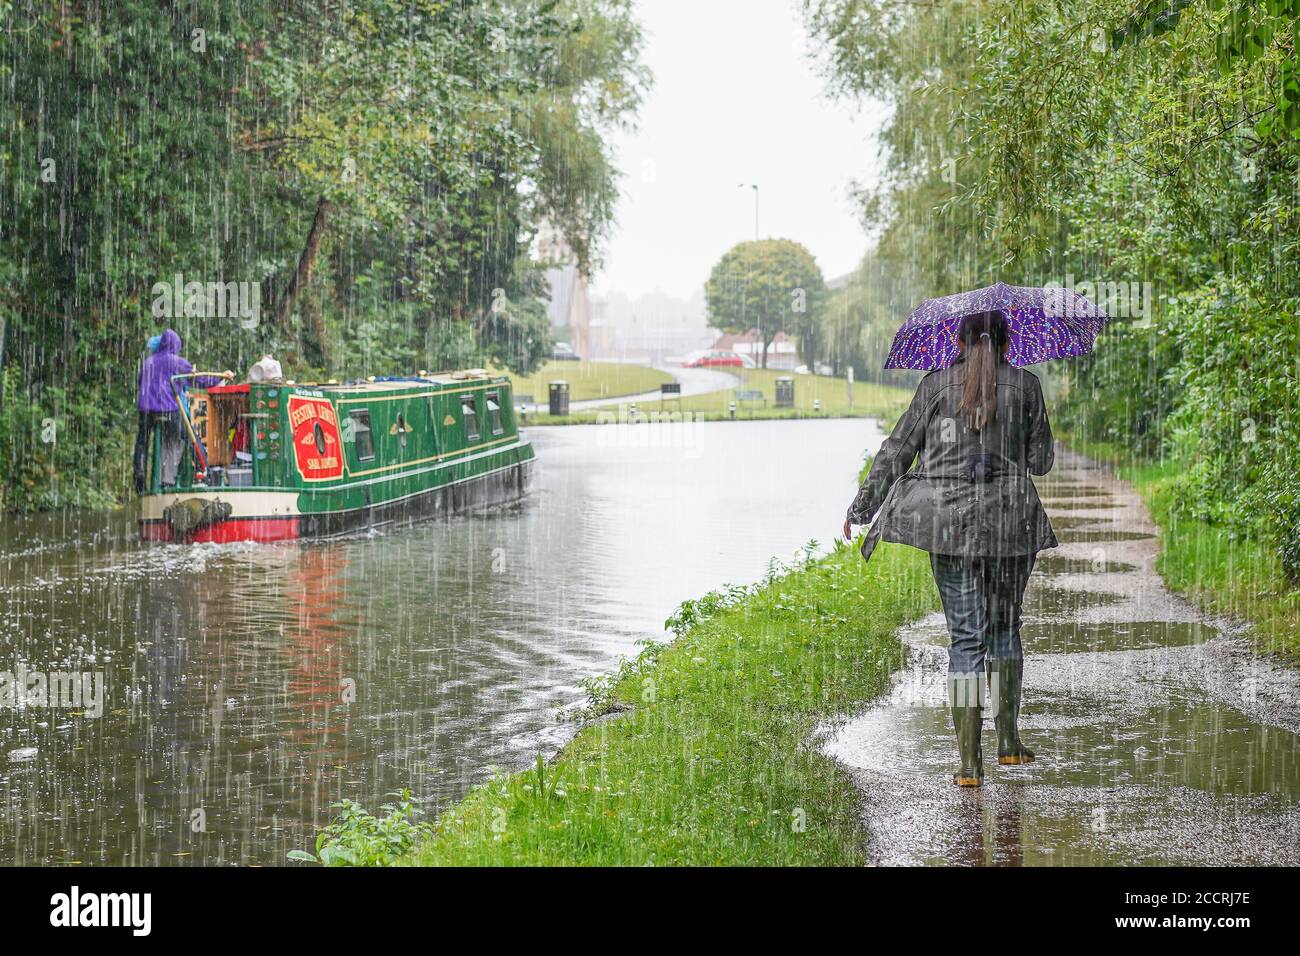 Rear view of woman in wellies sheltering under umbrella walking on towpath alongside moving narrowboat on British canal in heavy UK summer rain. Stock Photo